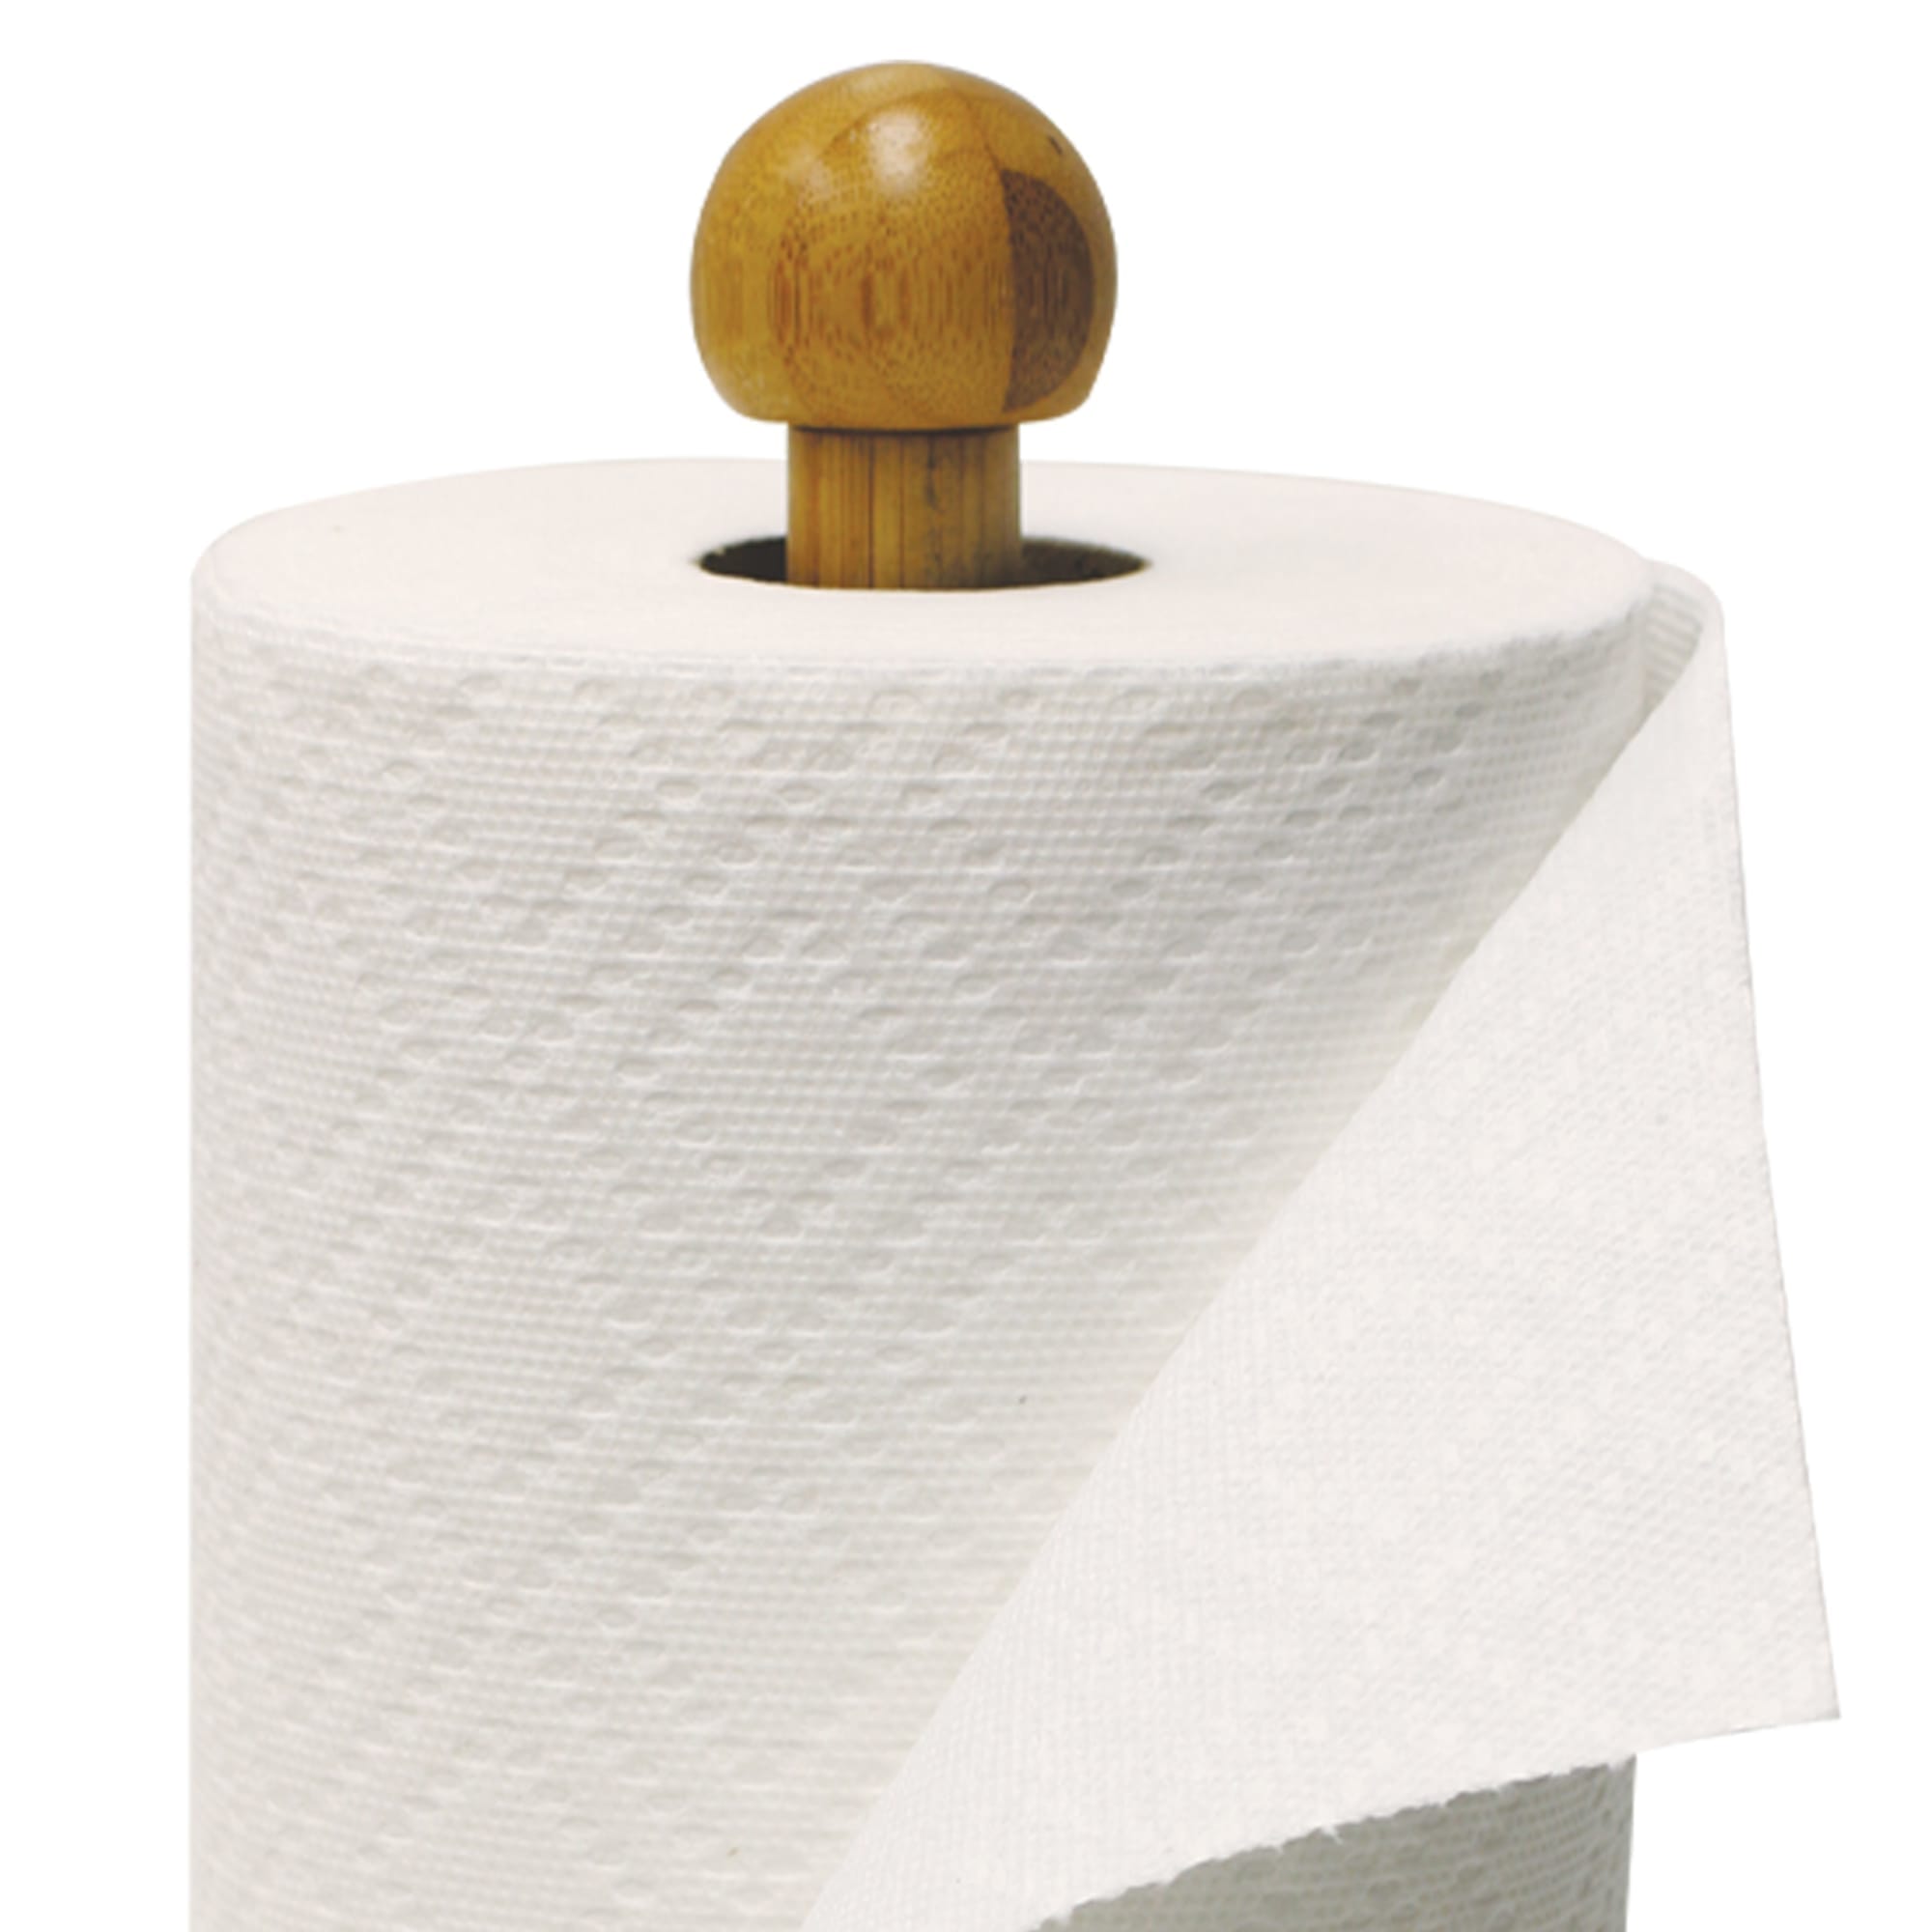 Home Basics  Easy Tear Bamboo Paper Towel Holder, Natural $6.00 EACH, CASE PACK OF 12